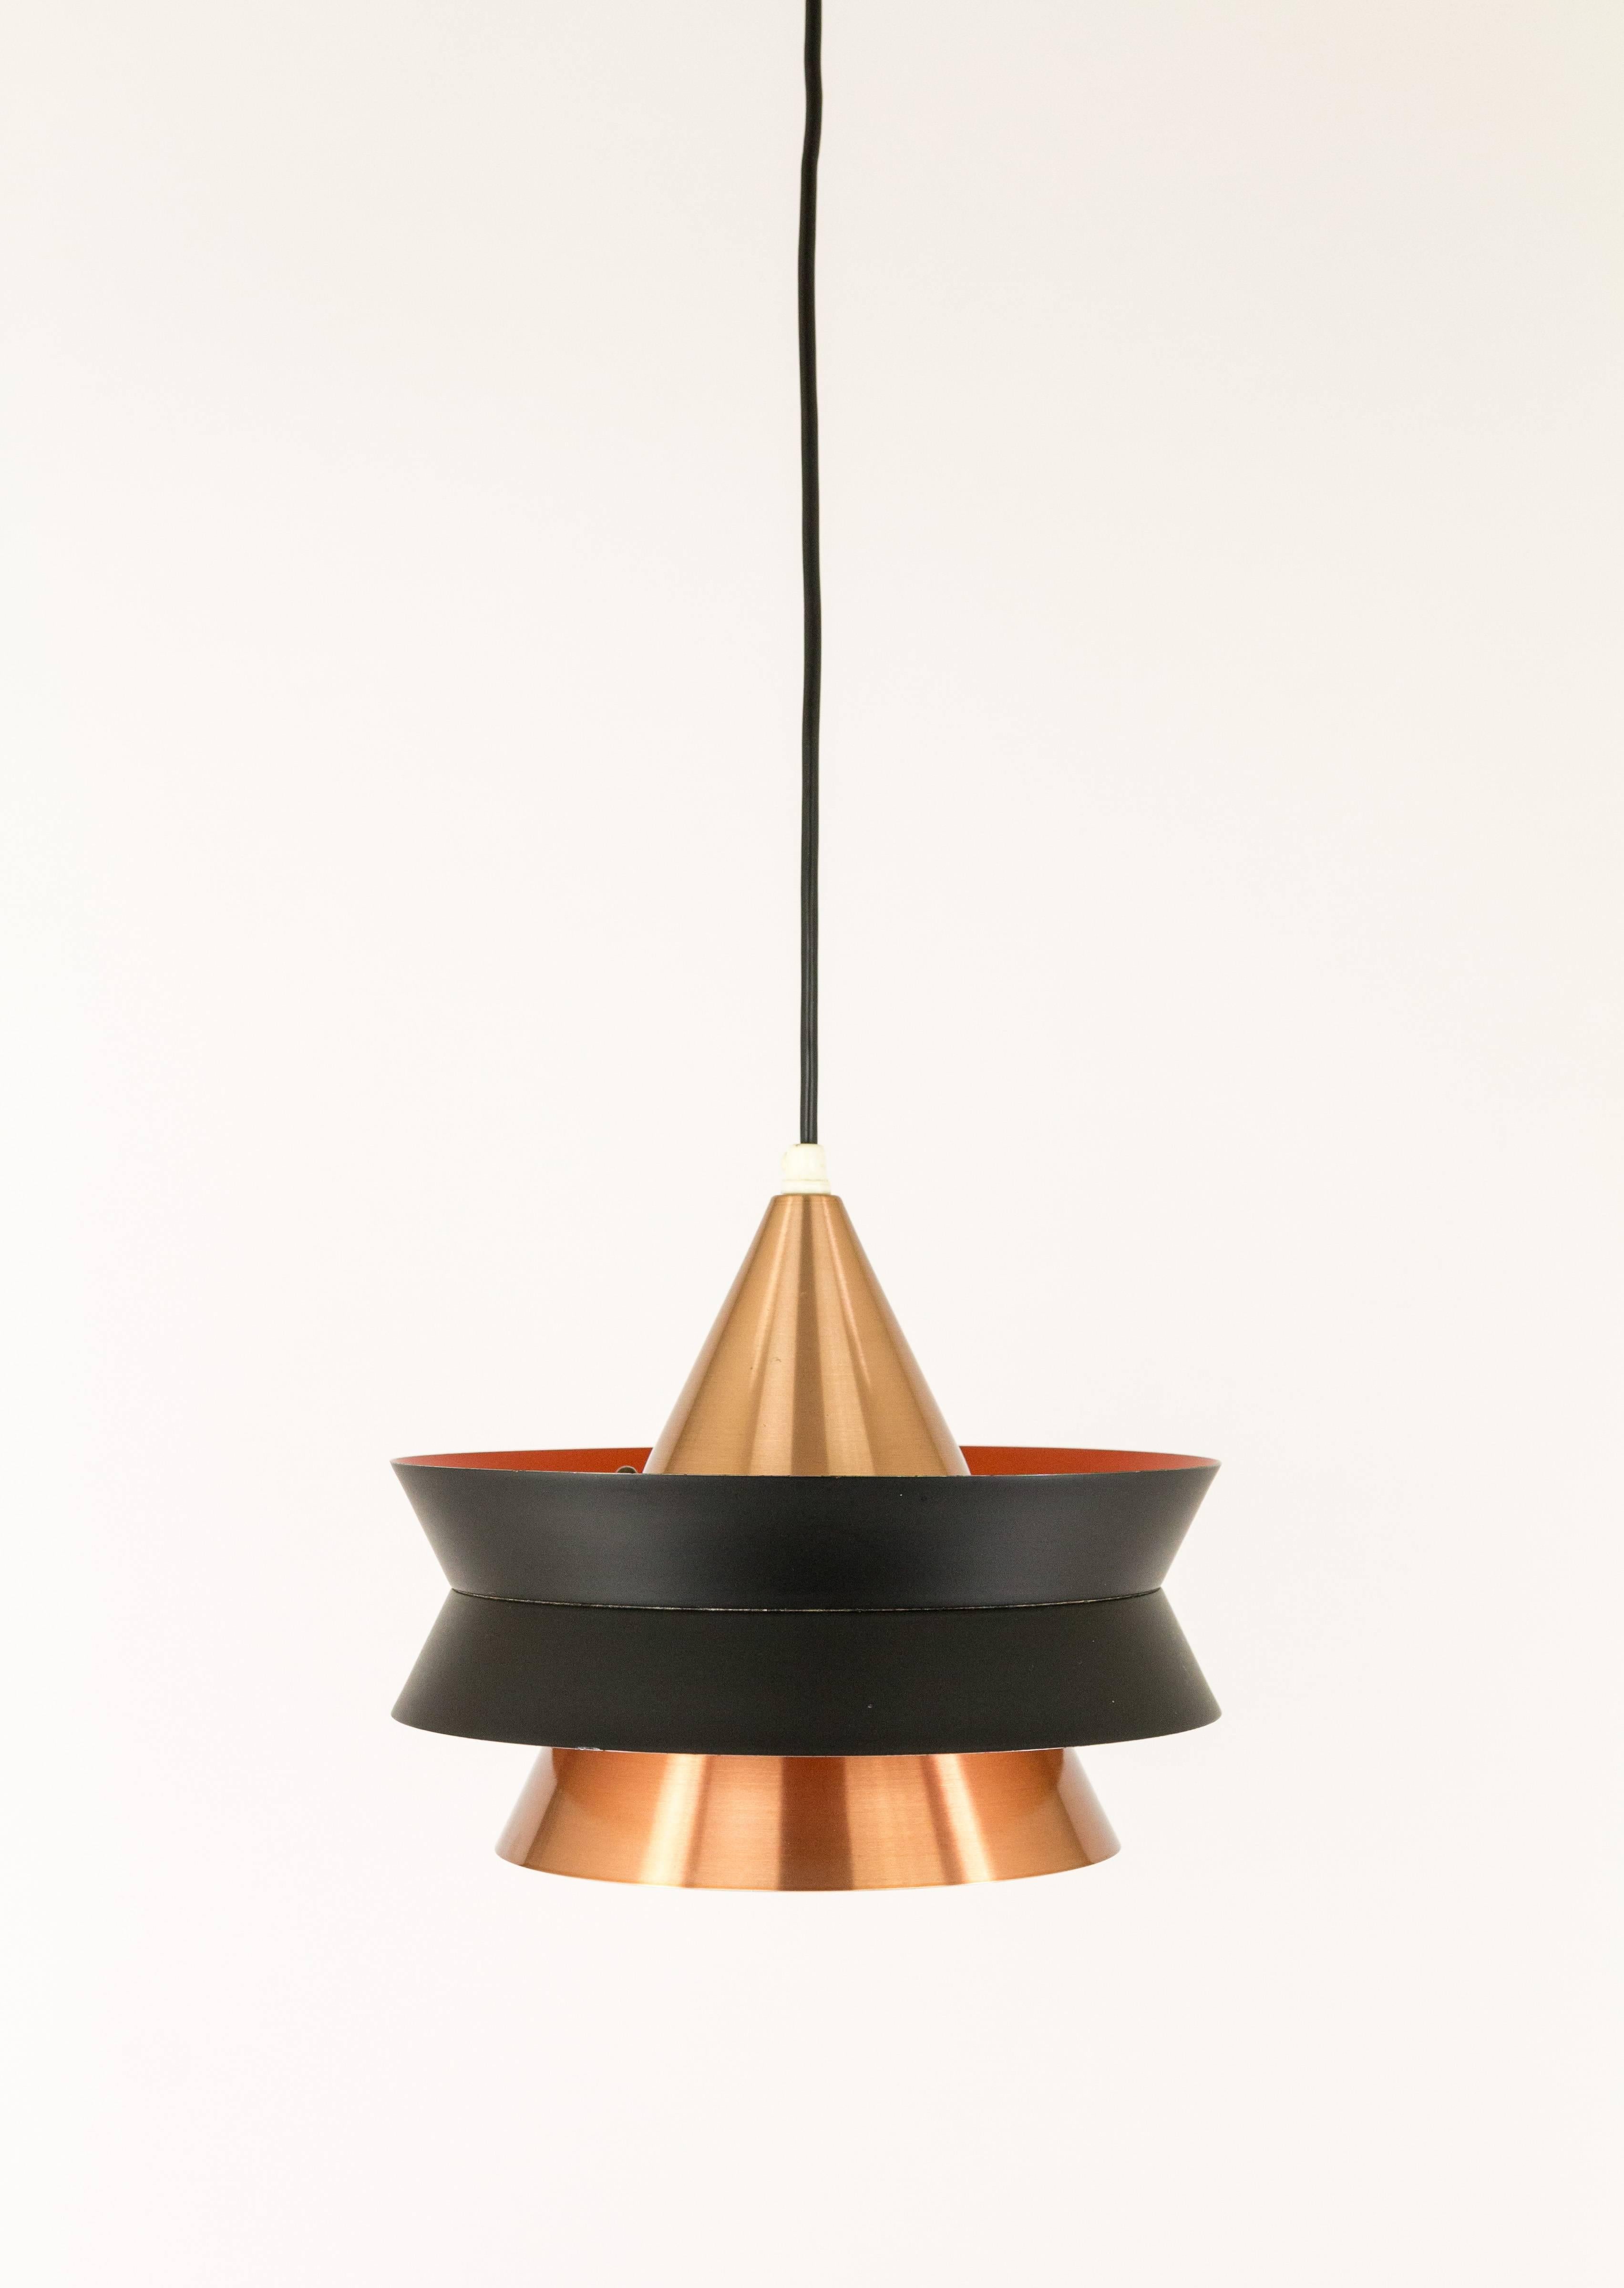 This cone-shaped pendant was designed by Carl Thore for Swedish lighting manufacturer Granhaga Metallindustri.

The cone of solid copper consists of two parts and is held together by a black lacquered metal ring. The orange and white coatings on the